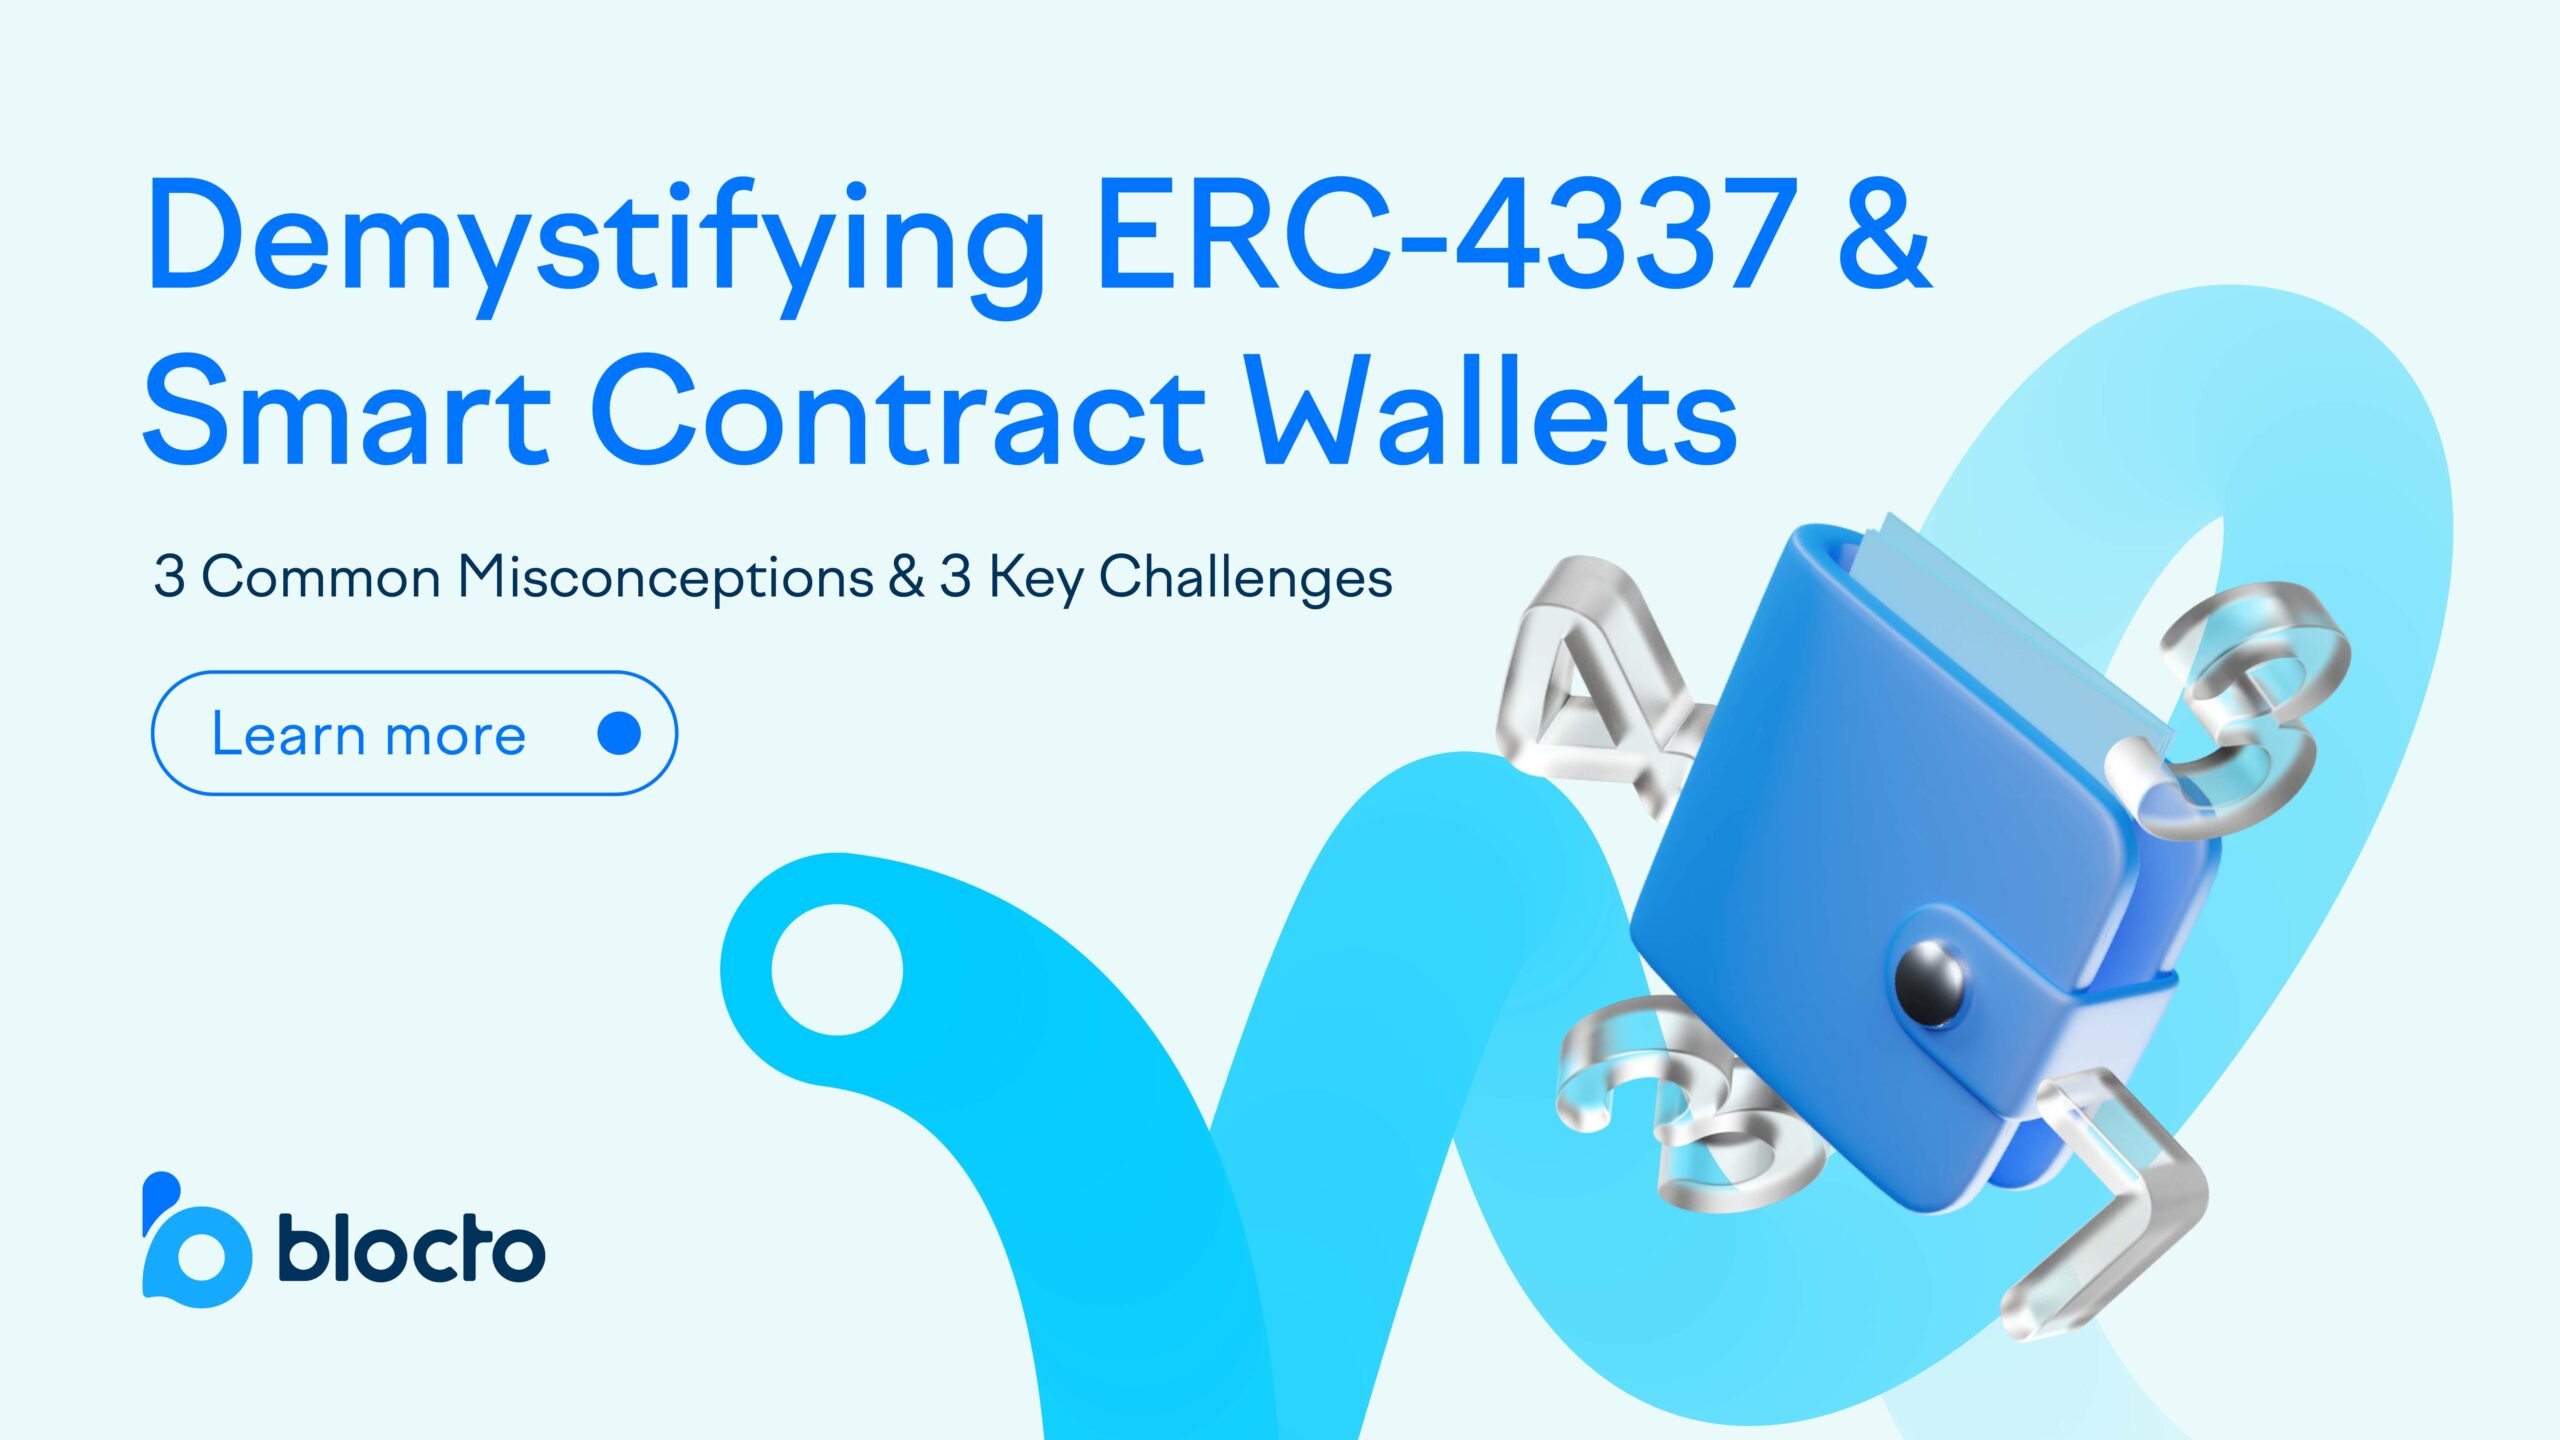 demystifying erc-4337 & smart contract wallets: 3 common misconceptions & 3 key challenges